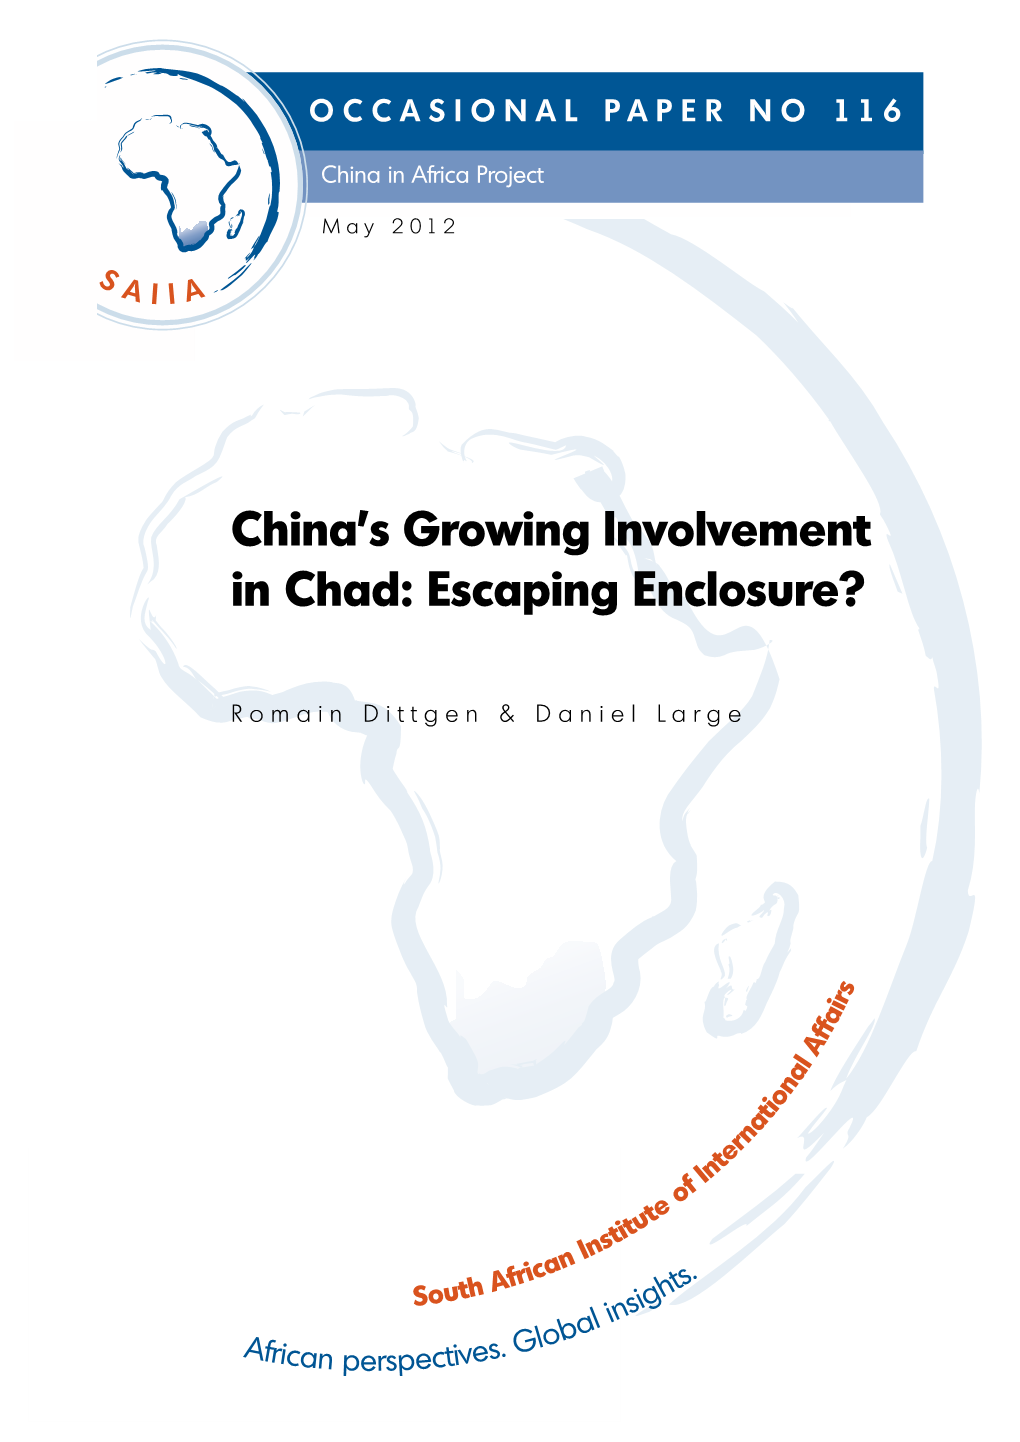 China's Growing Involvement in Chad